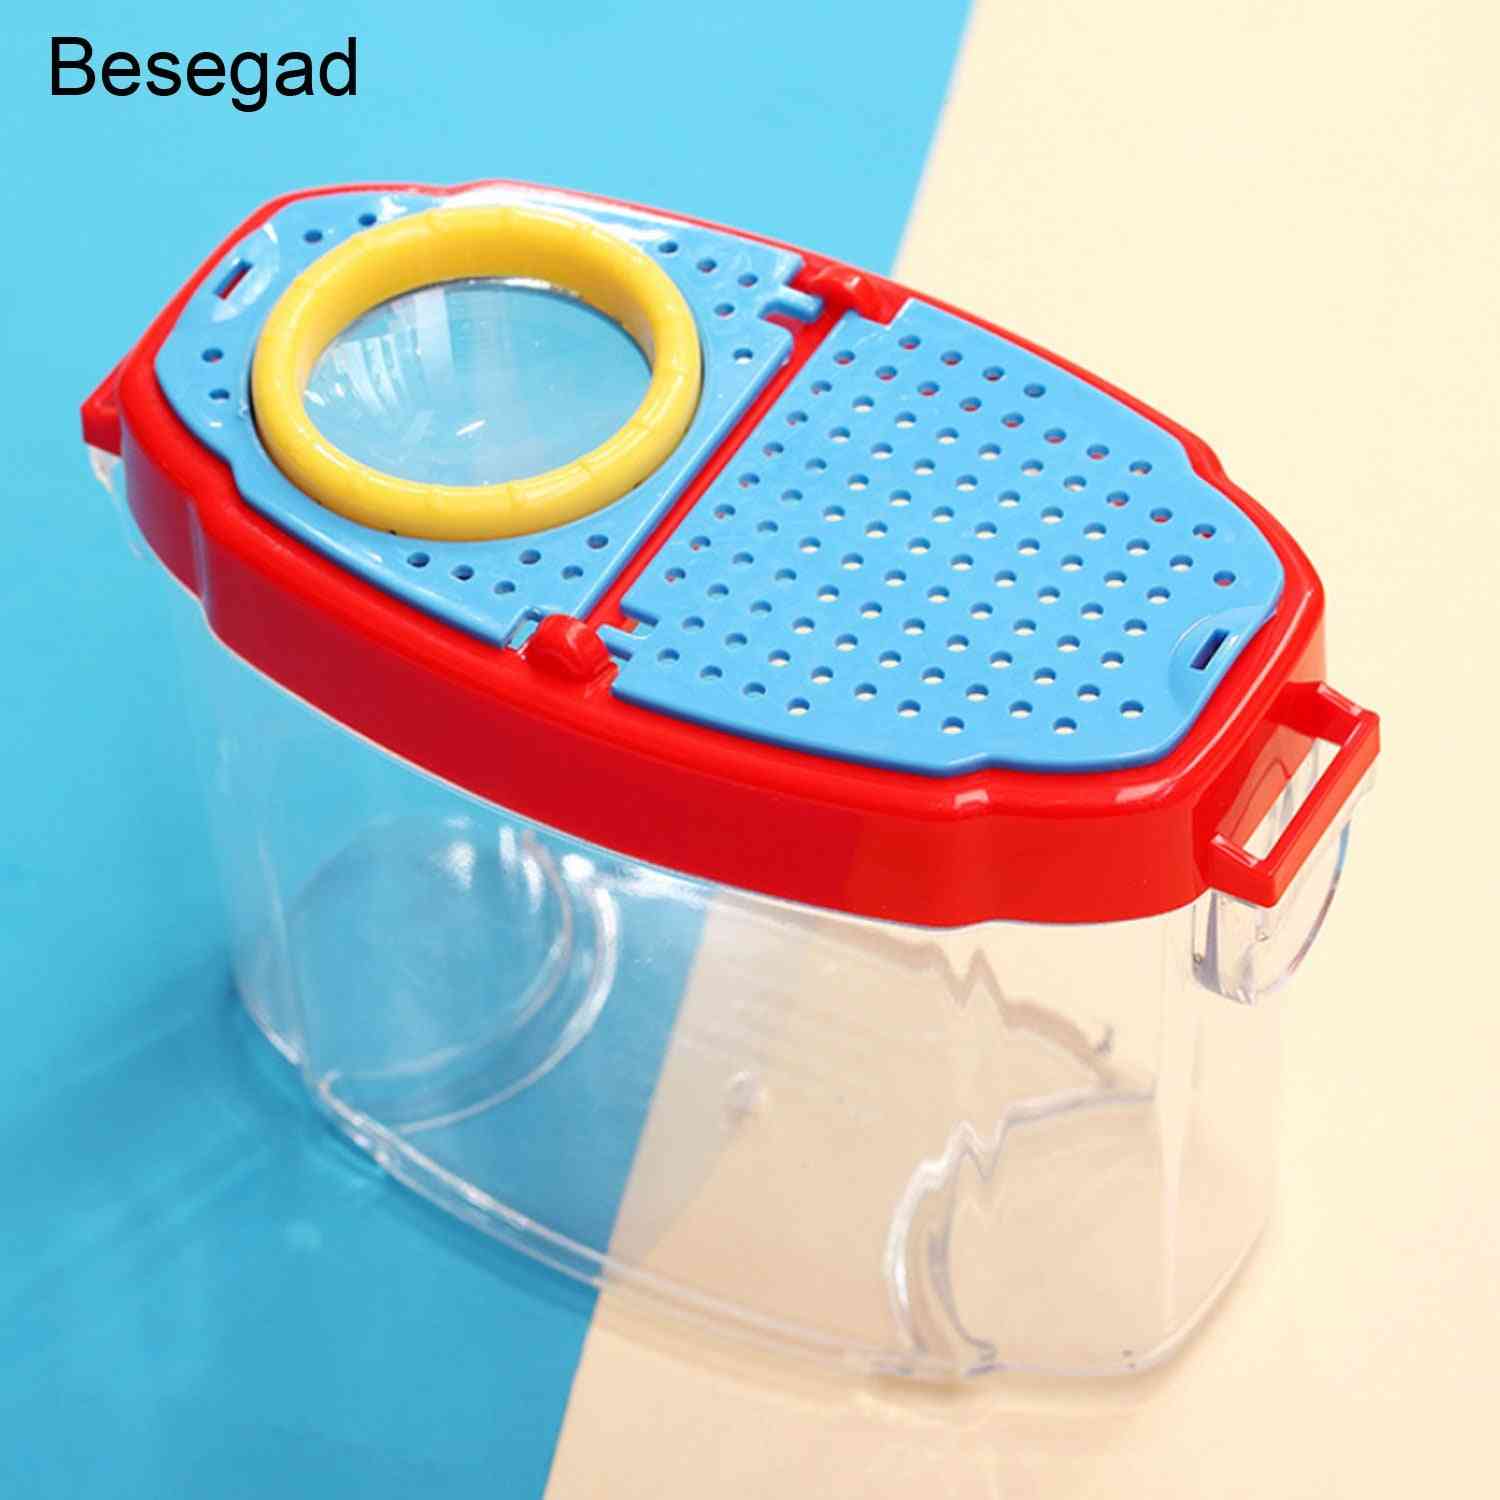 Besegad Bug Insect Catchers Carrier Case Viewer With 4.5x Magnification Windows , Backyard Exploration